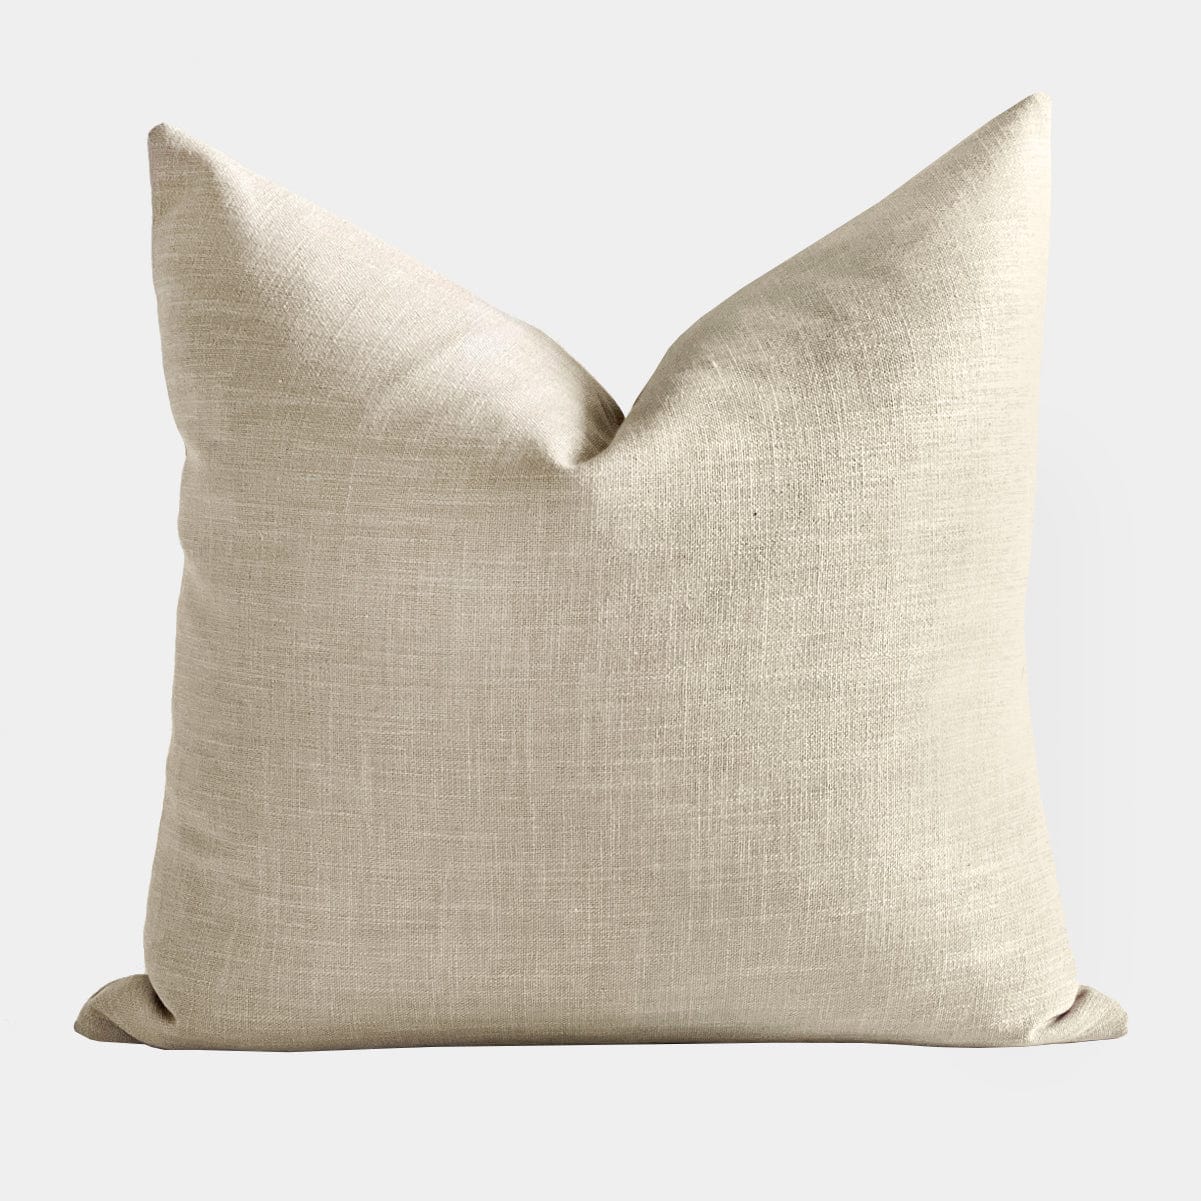 norsuHOME Cushions 40x60cm / Yes norsuHOME Washable Cushion, Natural Linen (7577446023417)